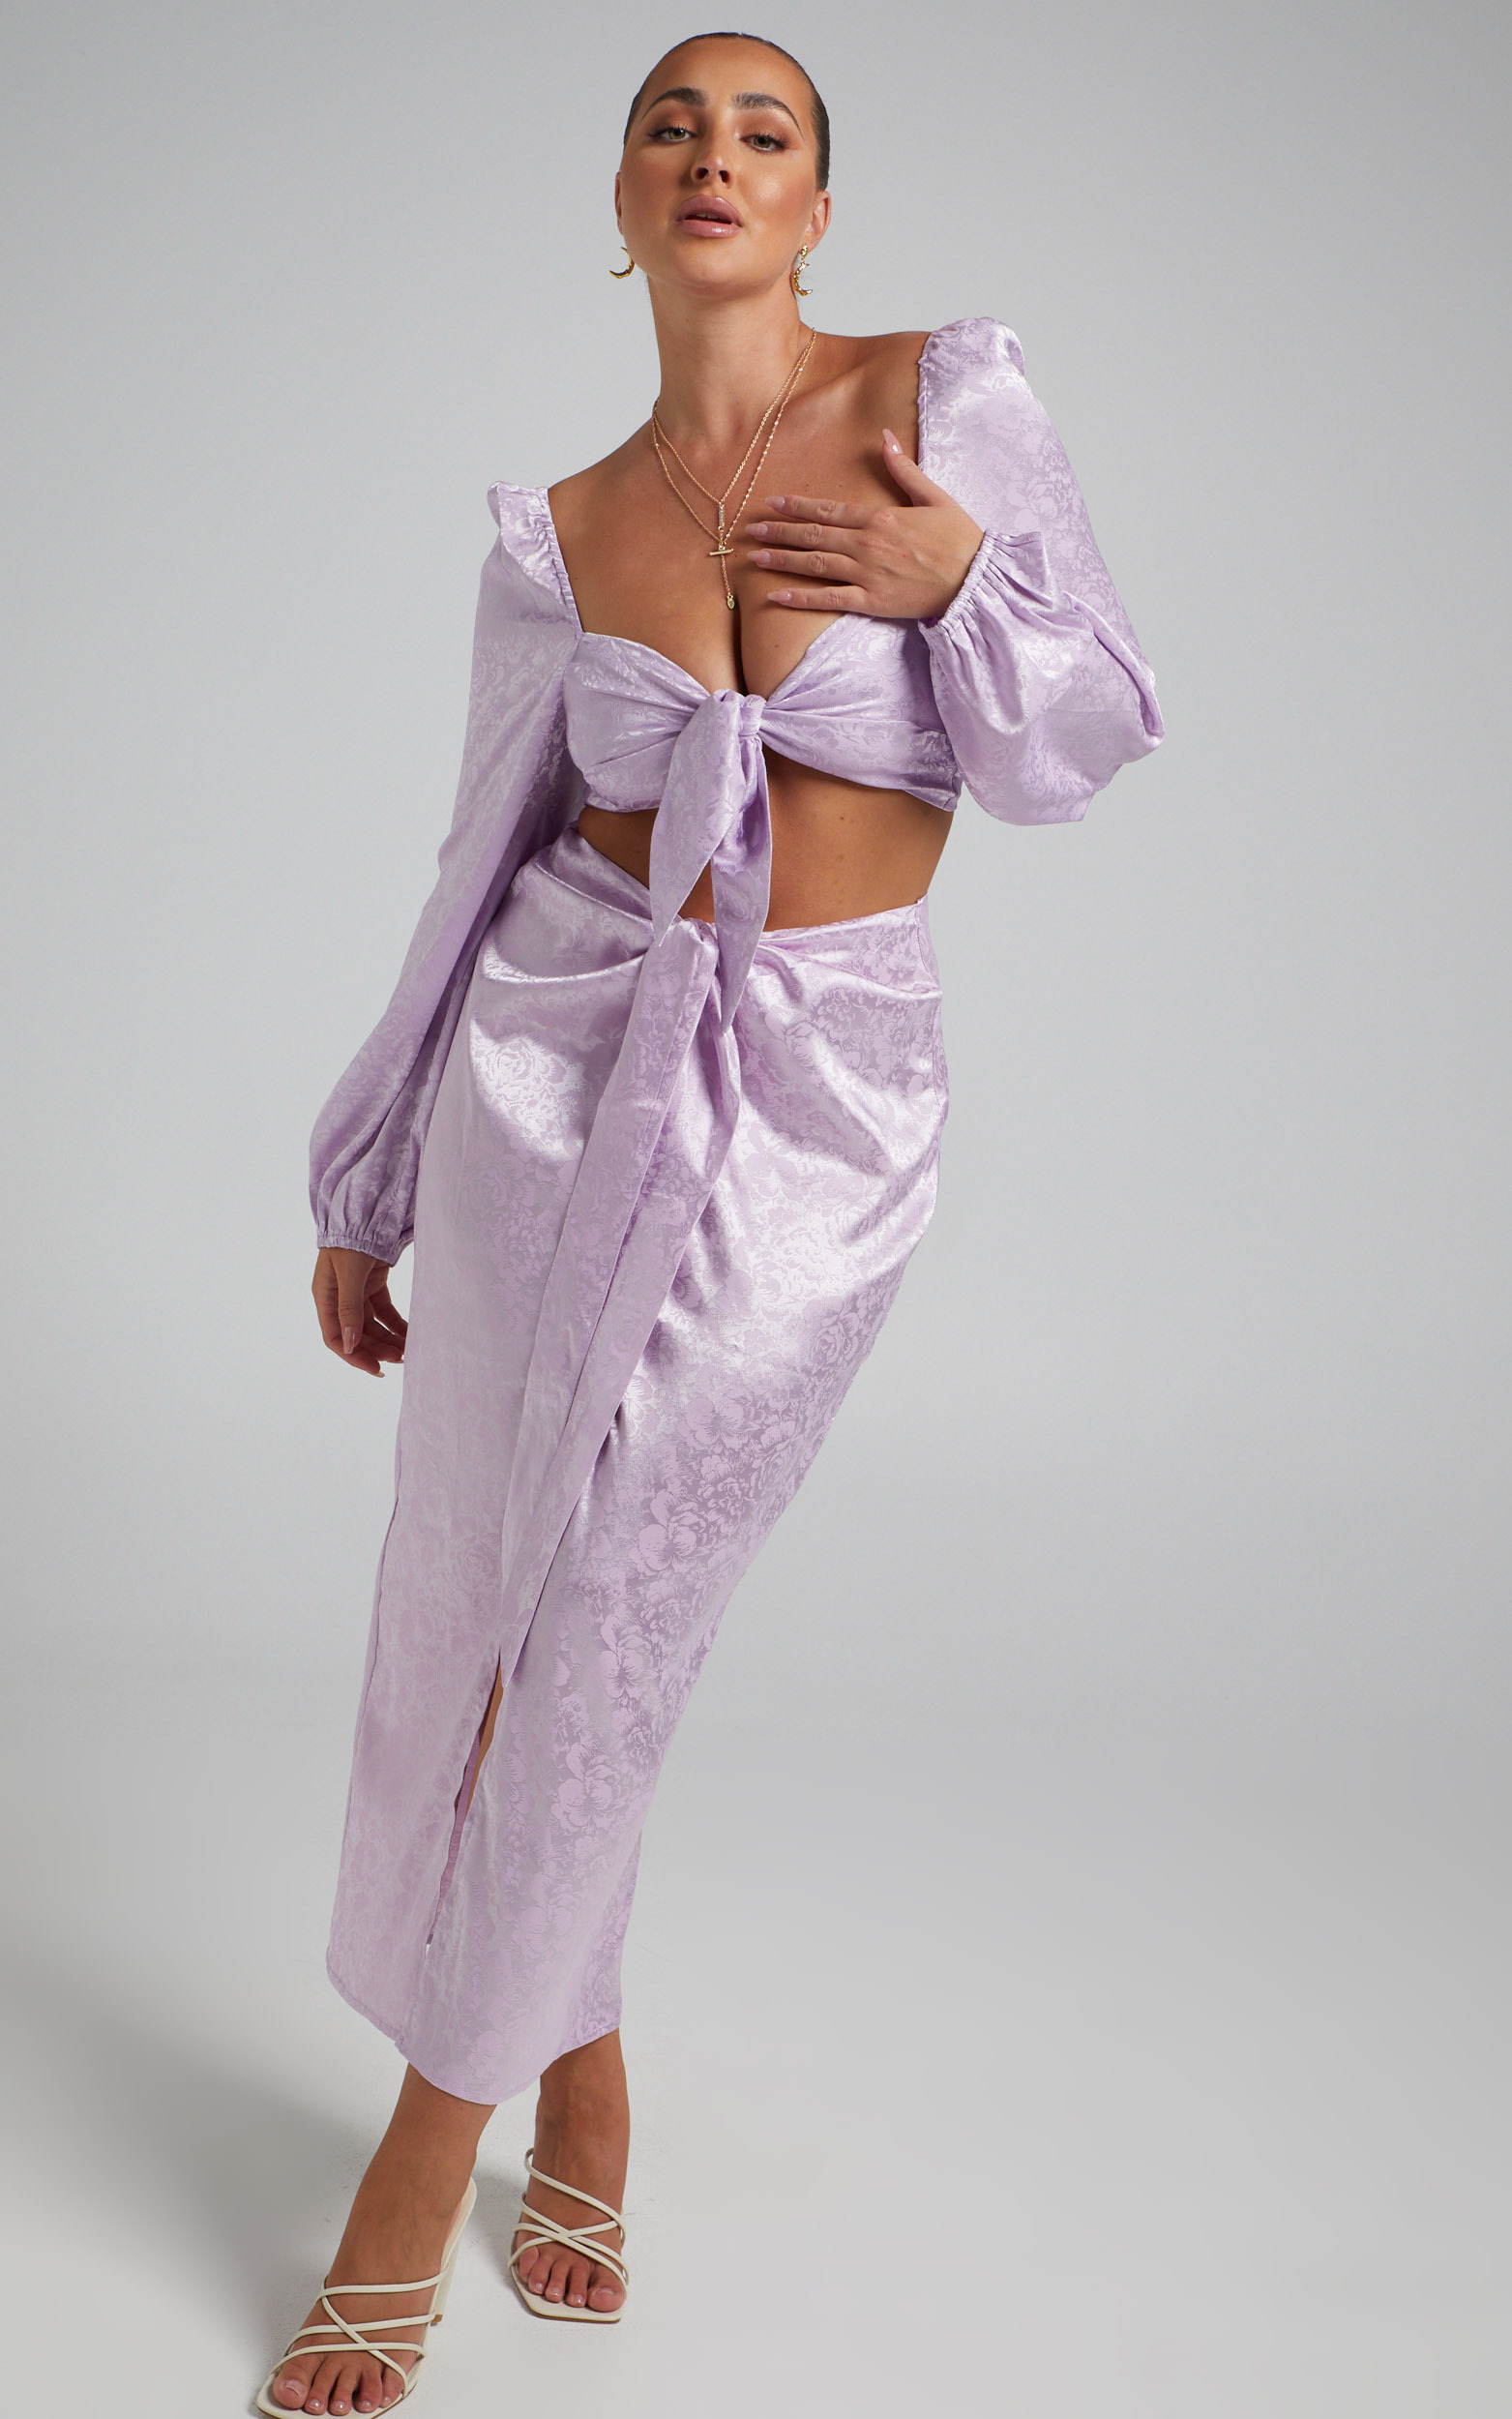 RUNAWAY THE LABEL - ROXIE TIE TOP in Lilac - L, PRP1, hi-res image number null